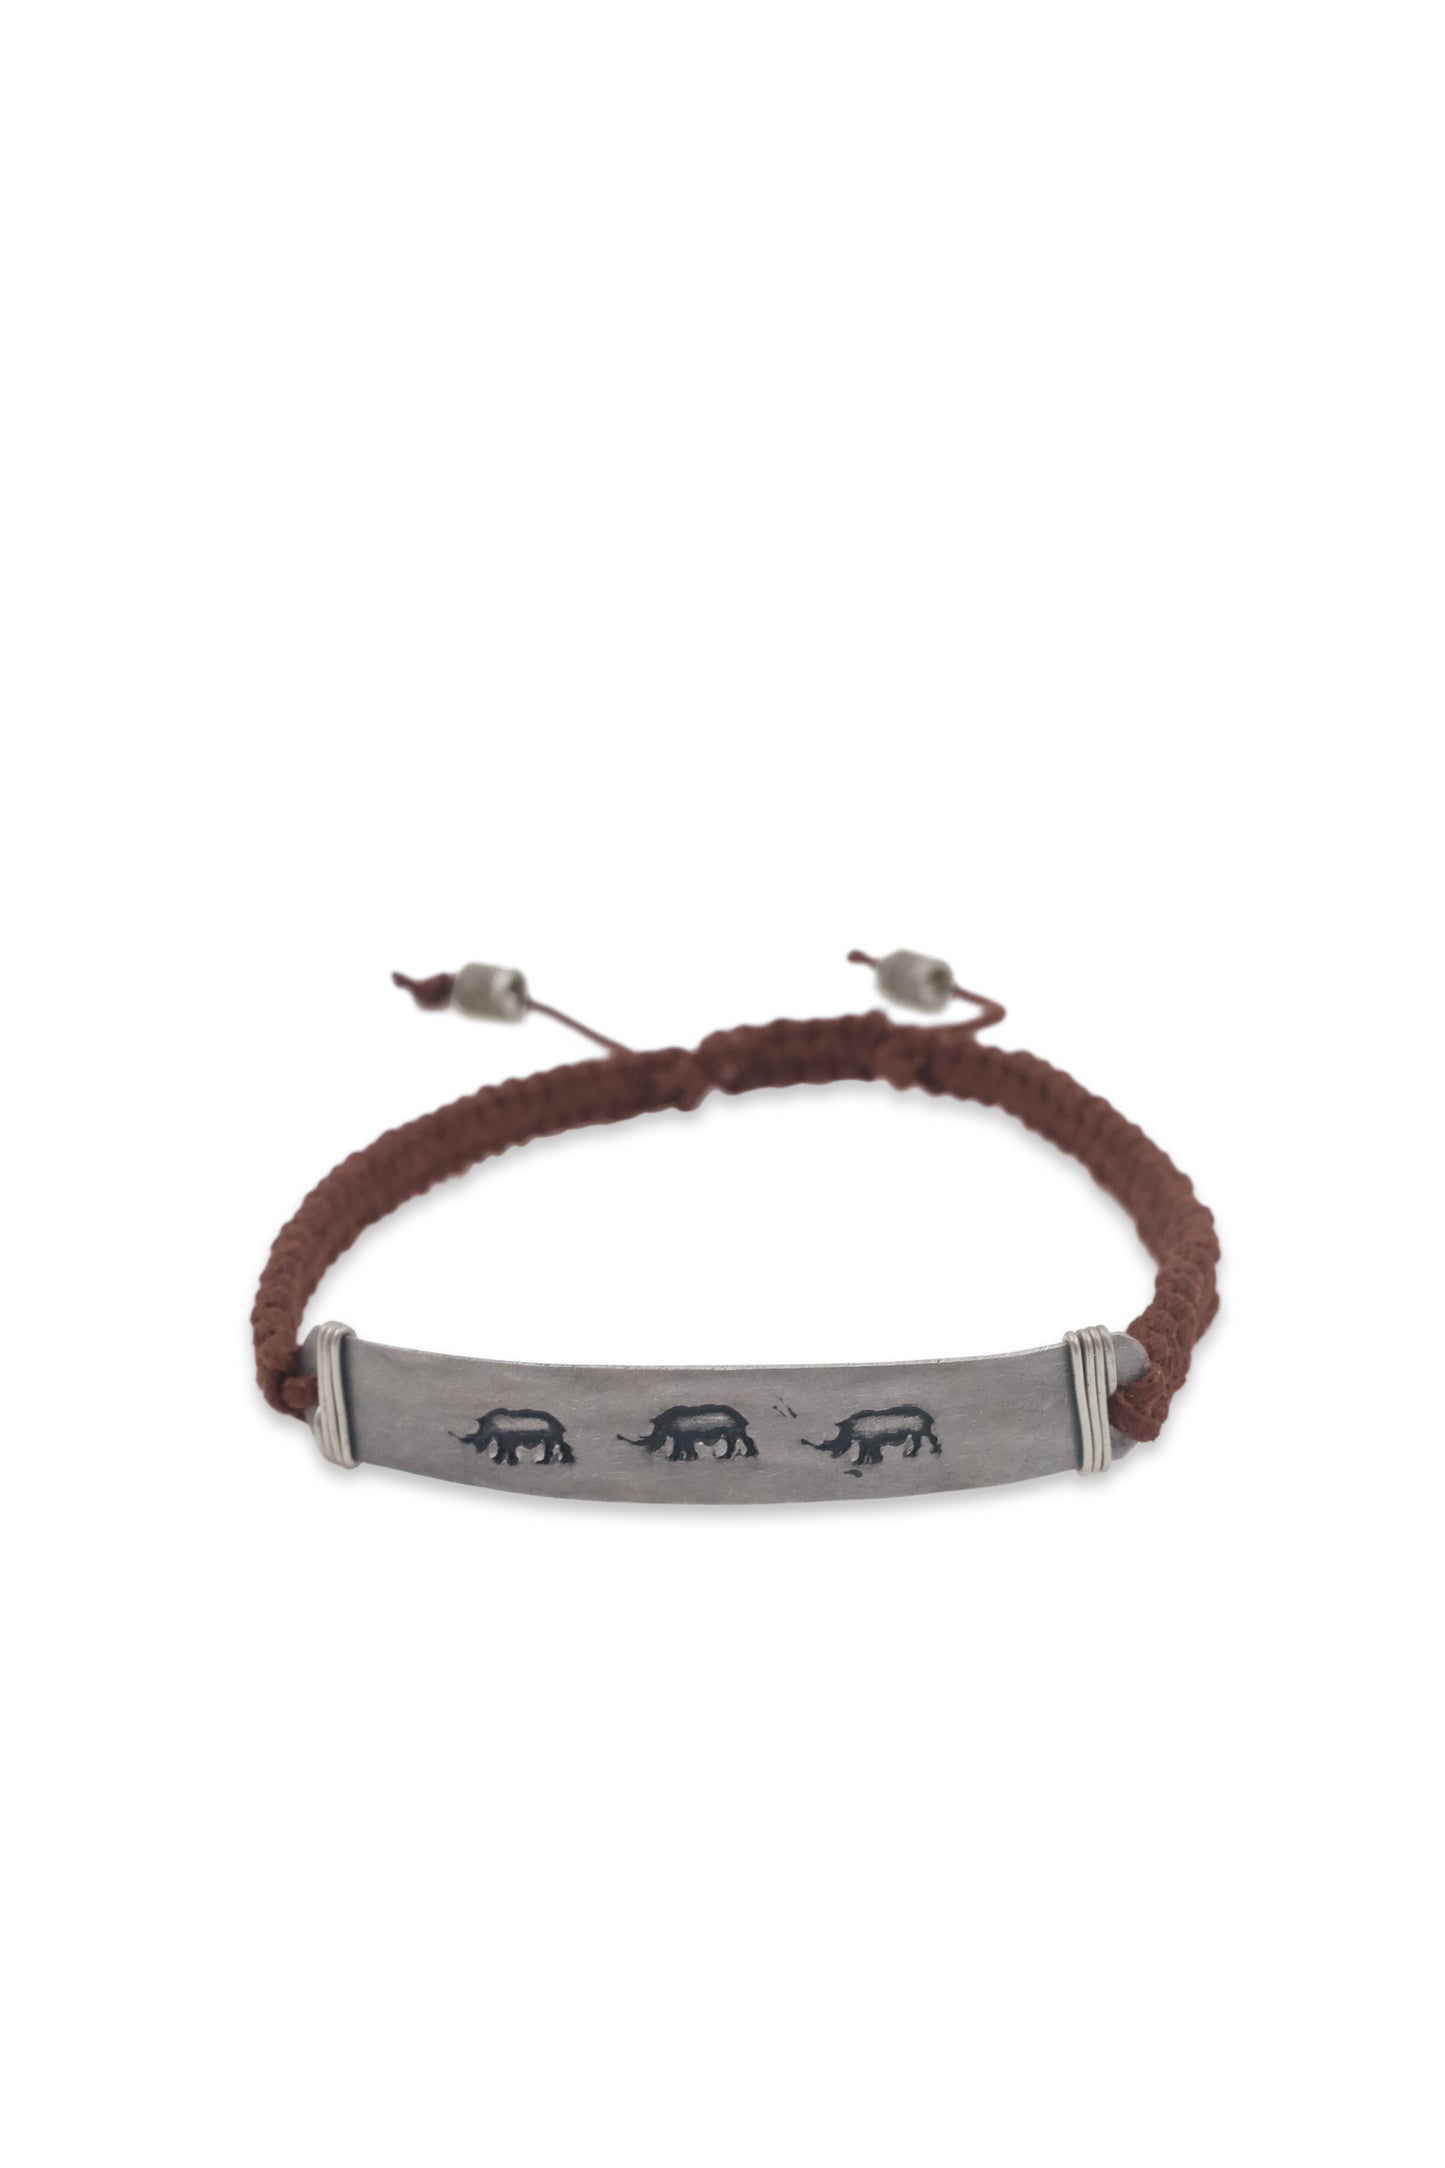 Hammered snare bracelet with rhino stamp